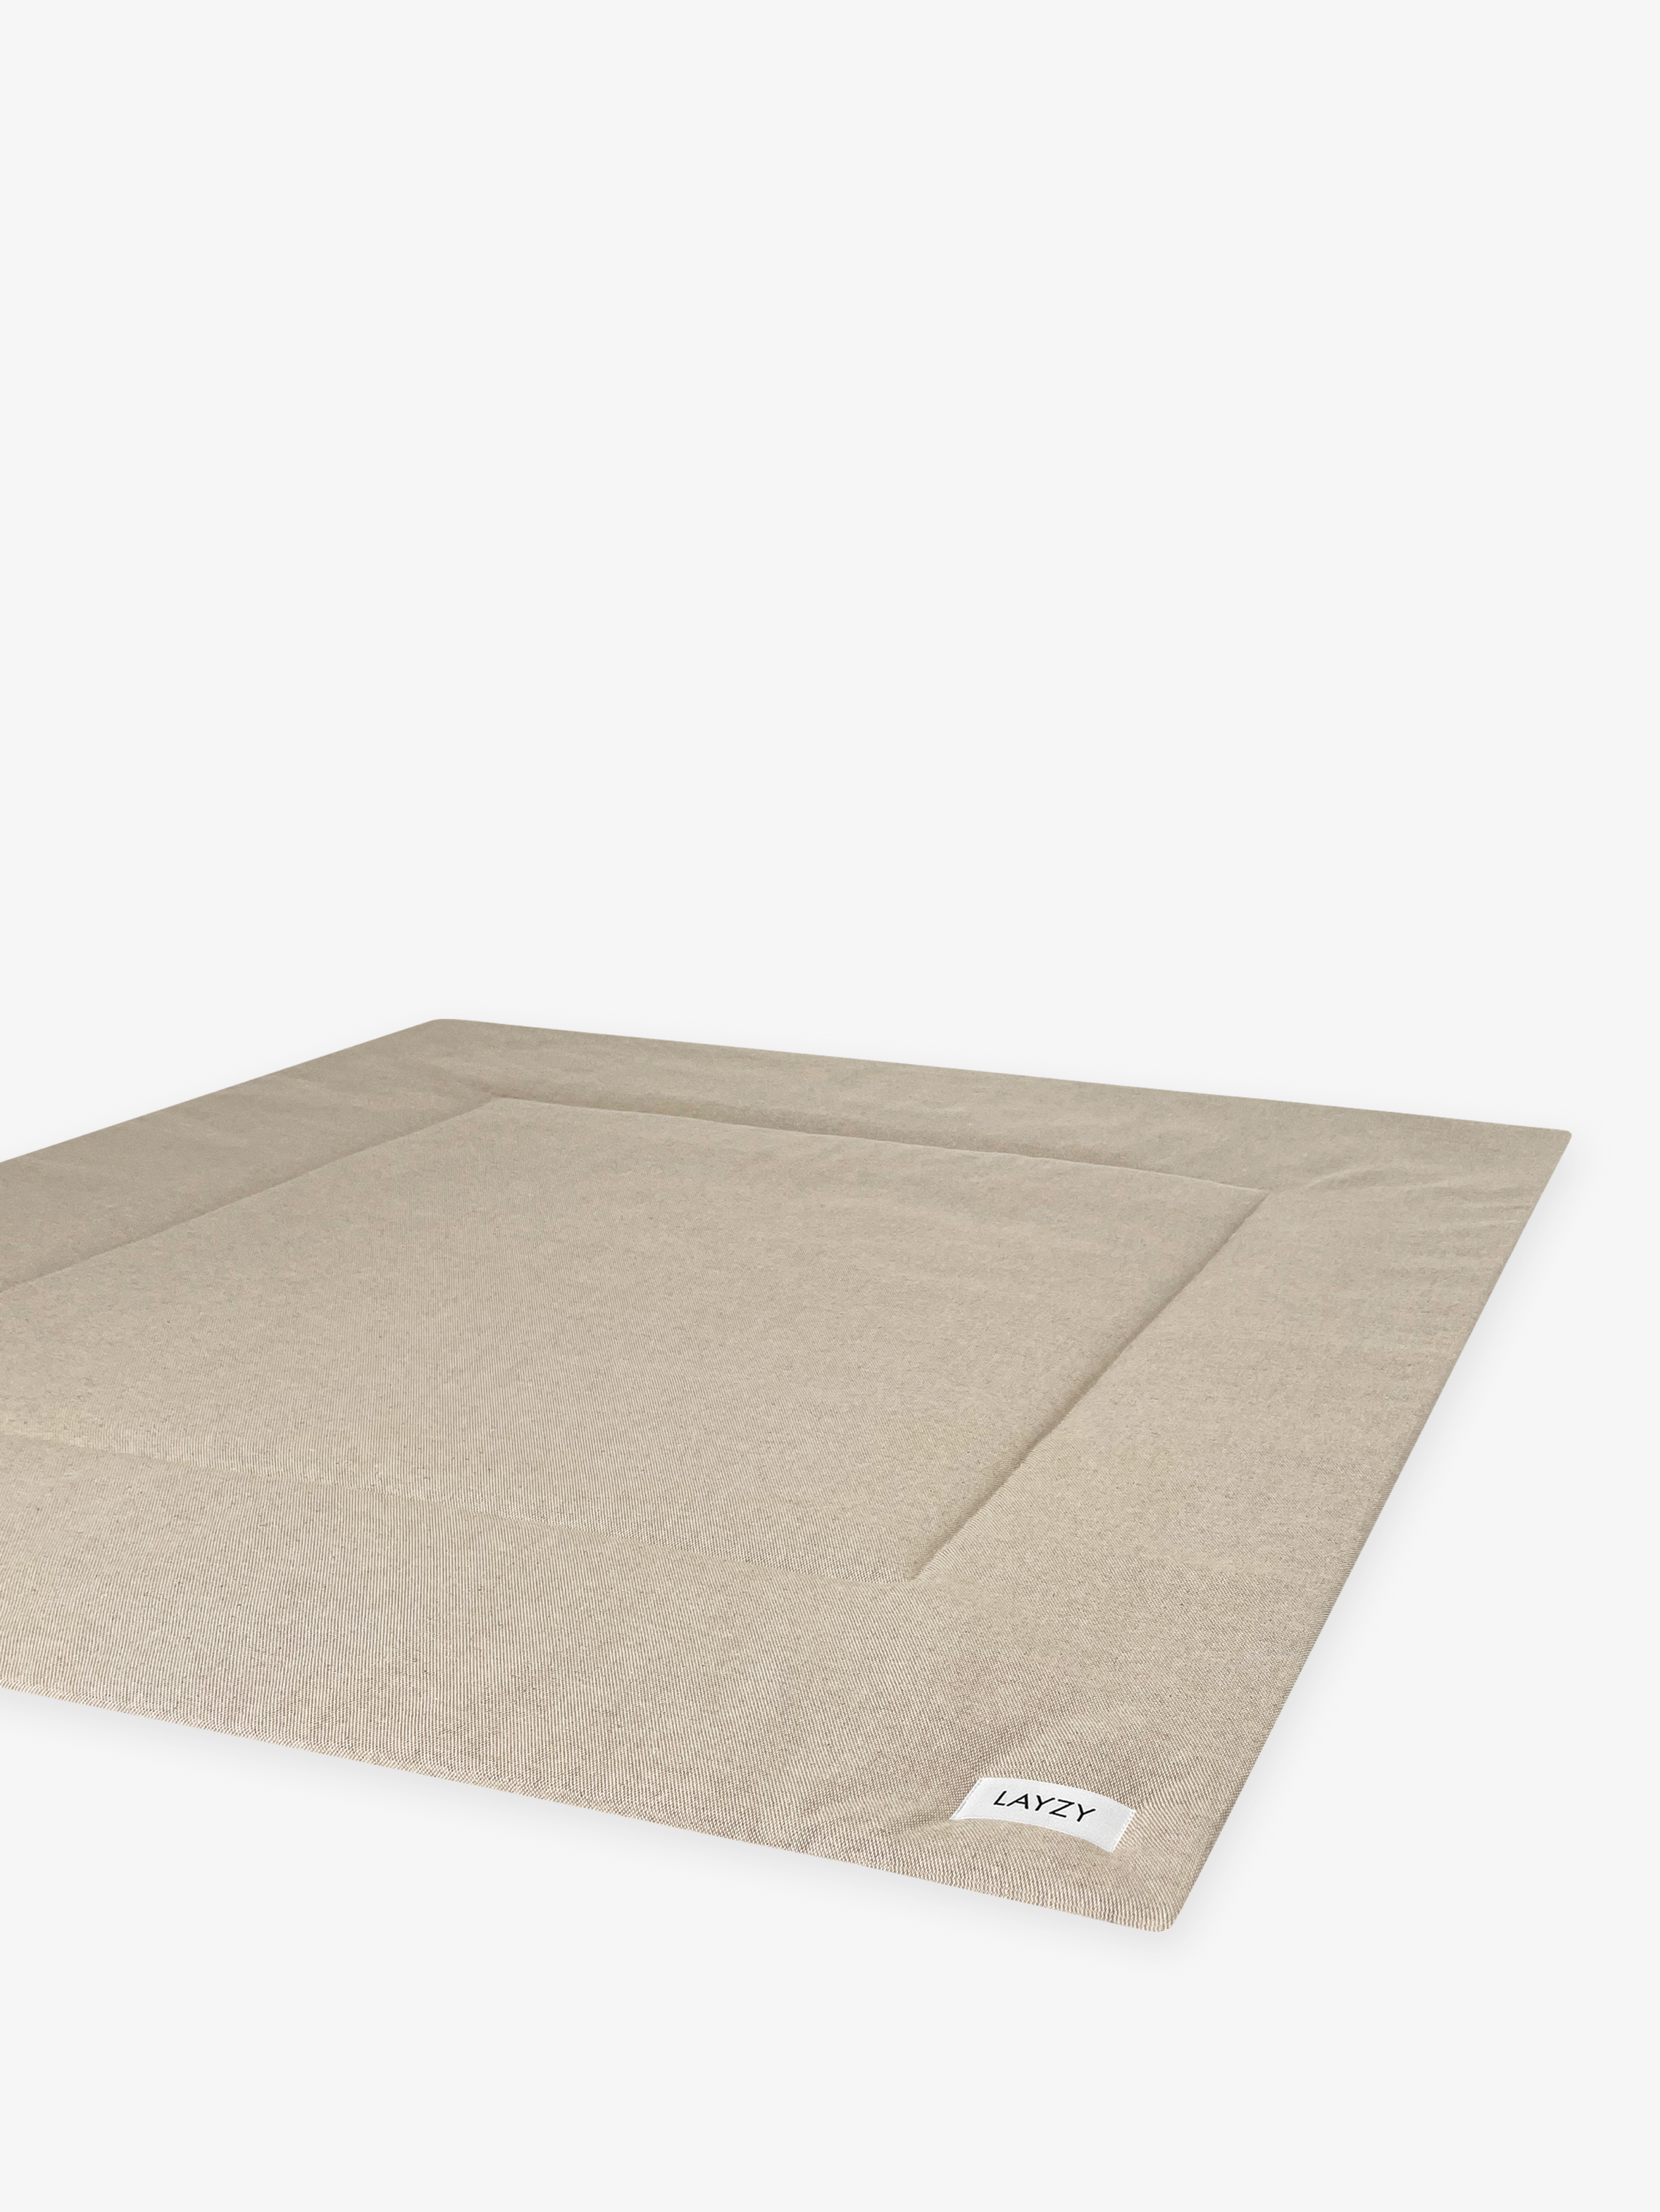 Picnic Blanket, Taupe